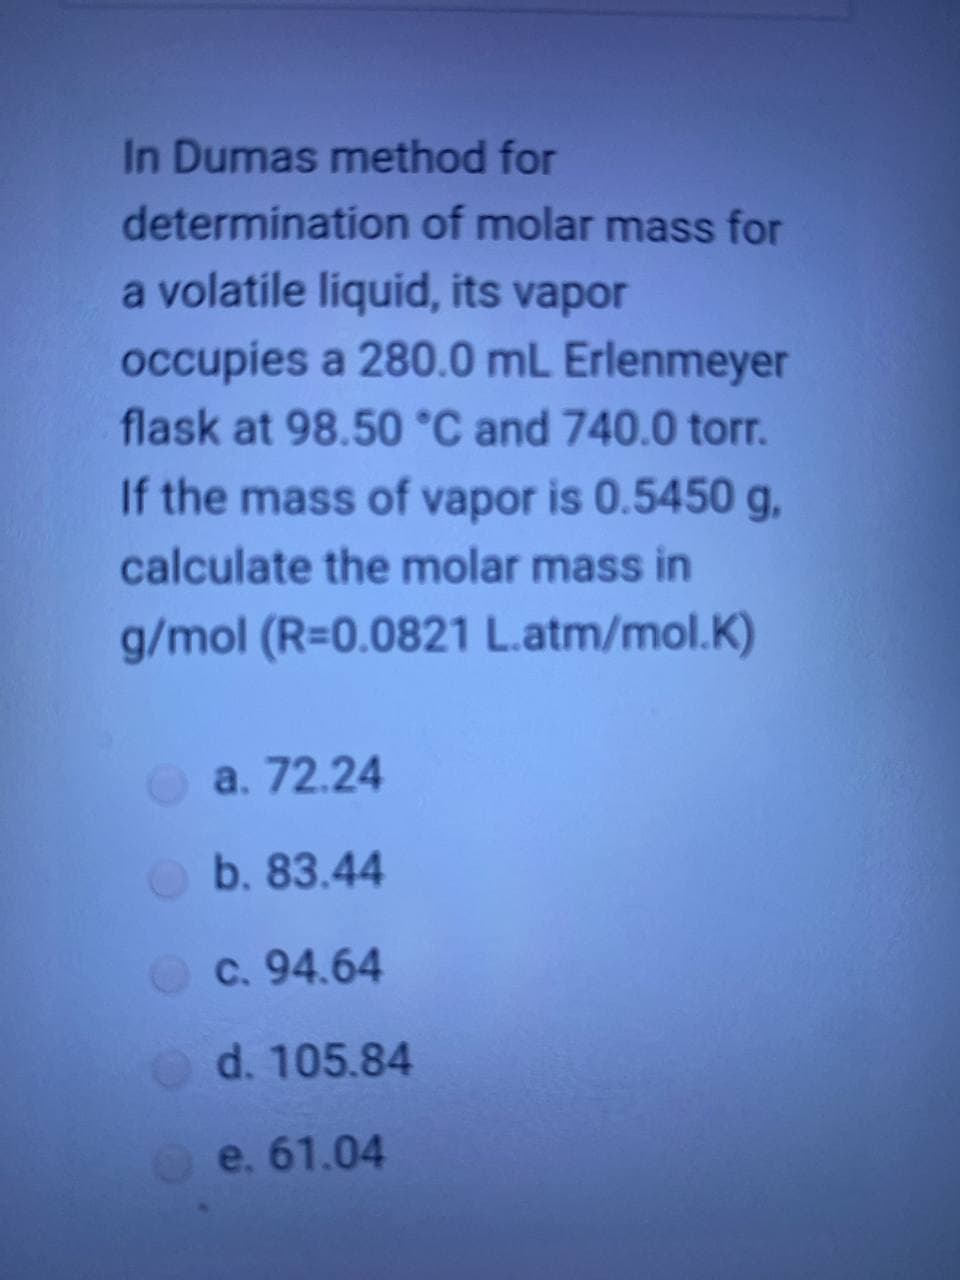 In Dumas method for
determination of molar mass for
a volatile liquid, its vapor
occupies a 280.0 mL Erlenmeyer
flask at 98.50 °C and 740.0 torr.
If the mass of vapor is 0.5450 g,
calculate the molar mass in
g/mol (R=0.0821 L.atm/mol.K)
a. 72.24
b. 83.44
c. 94.64
d. 105.84
e. 61.04
